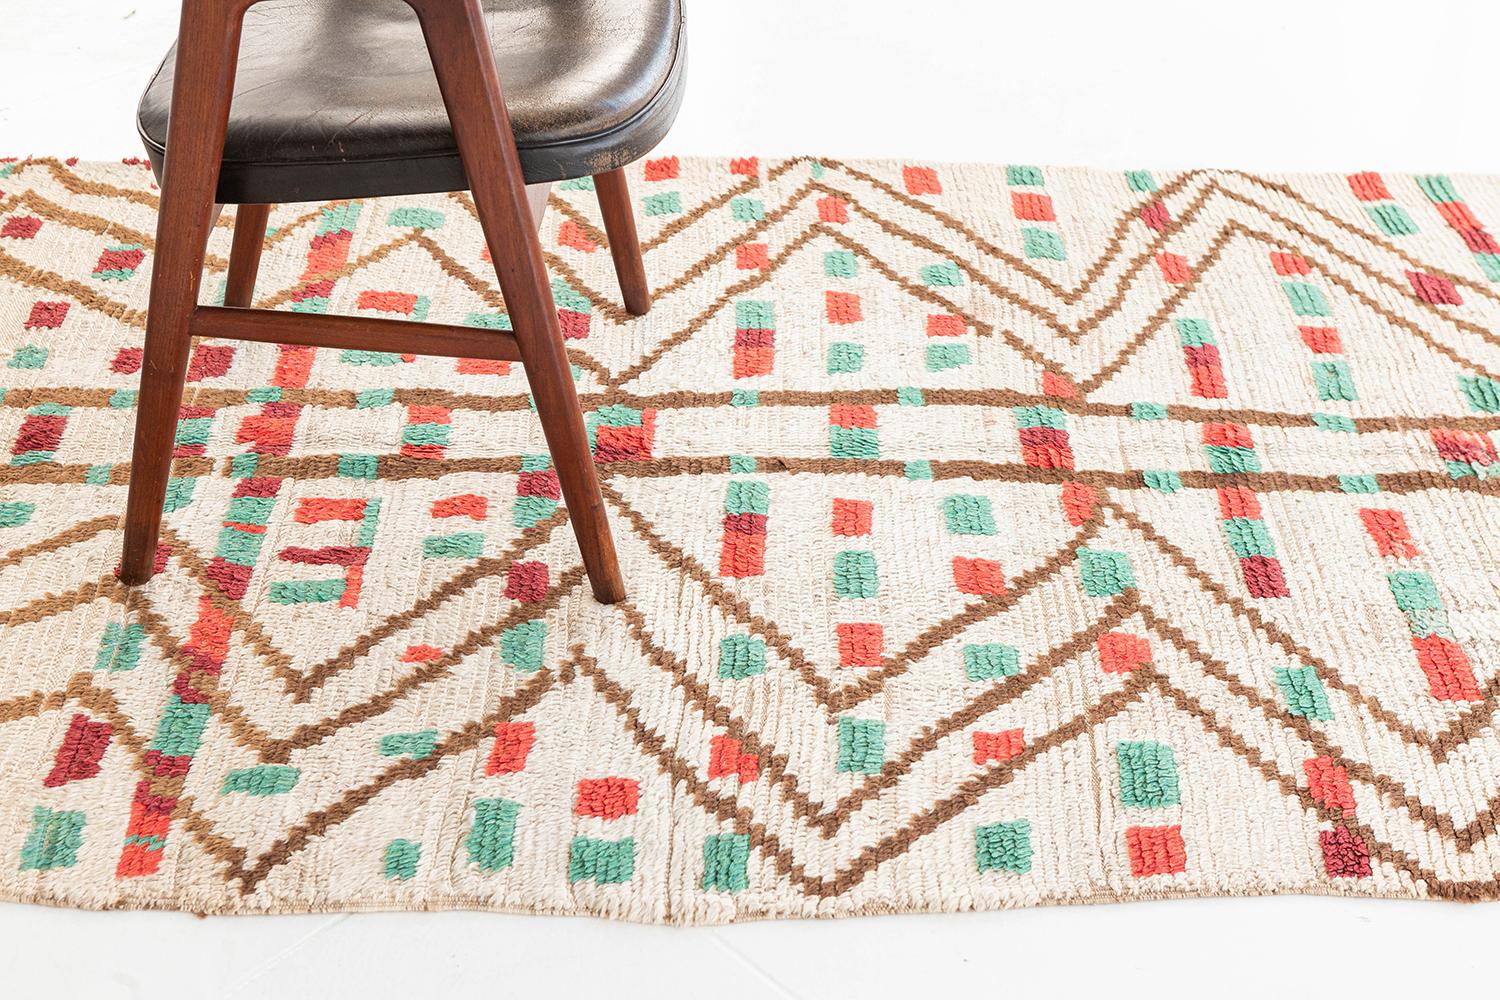 This chic and stylish Moroccan rug, an Azilal Tribe Design, from our Atlas Collection, feels like an ambience of summer season. A quirky design that easy to fall in love with. Colors of teal, valiant poppy, coral orange, and martini olives on the